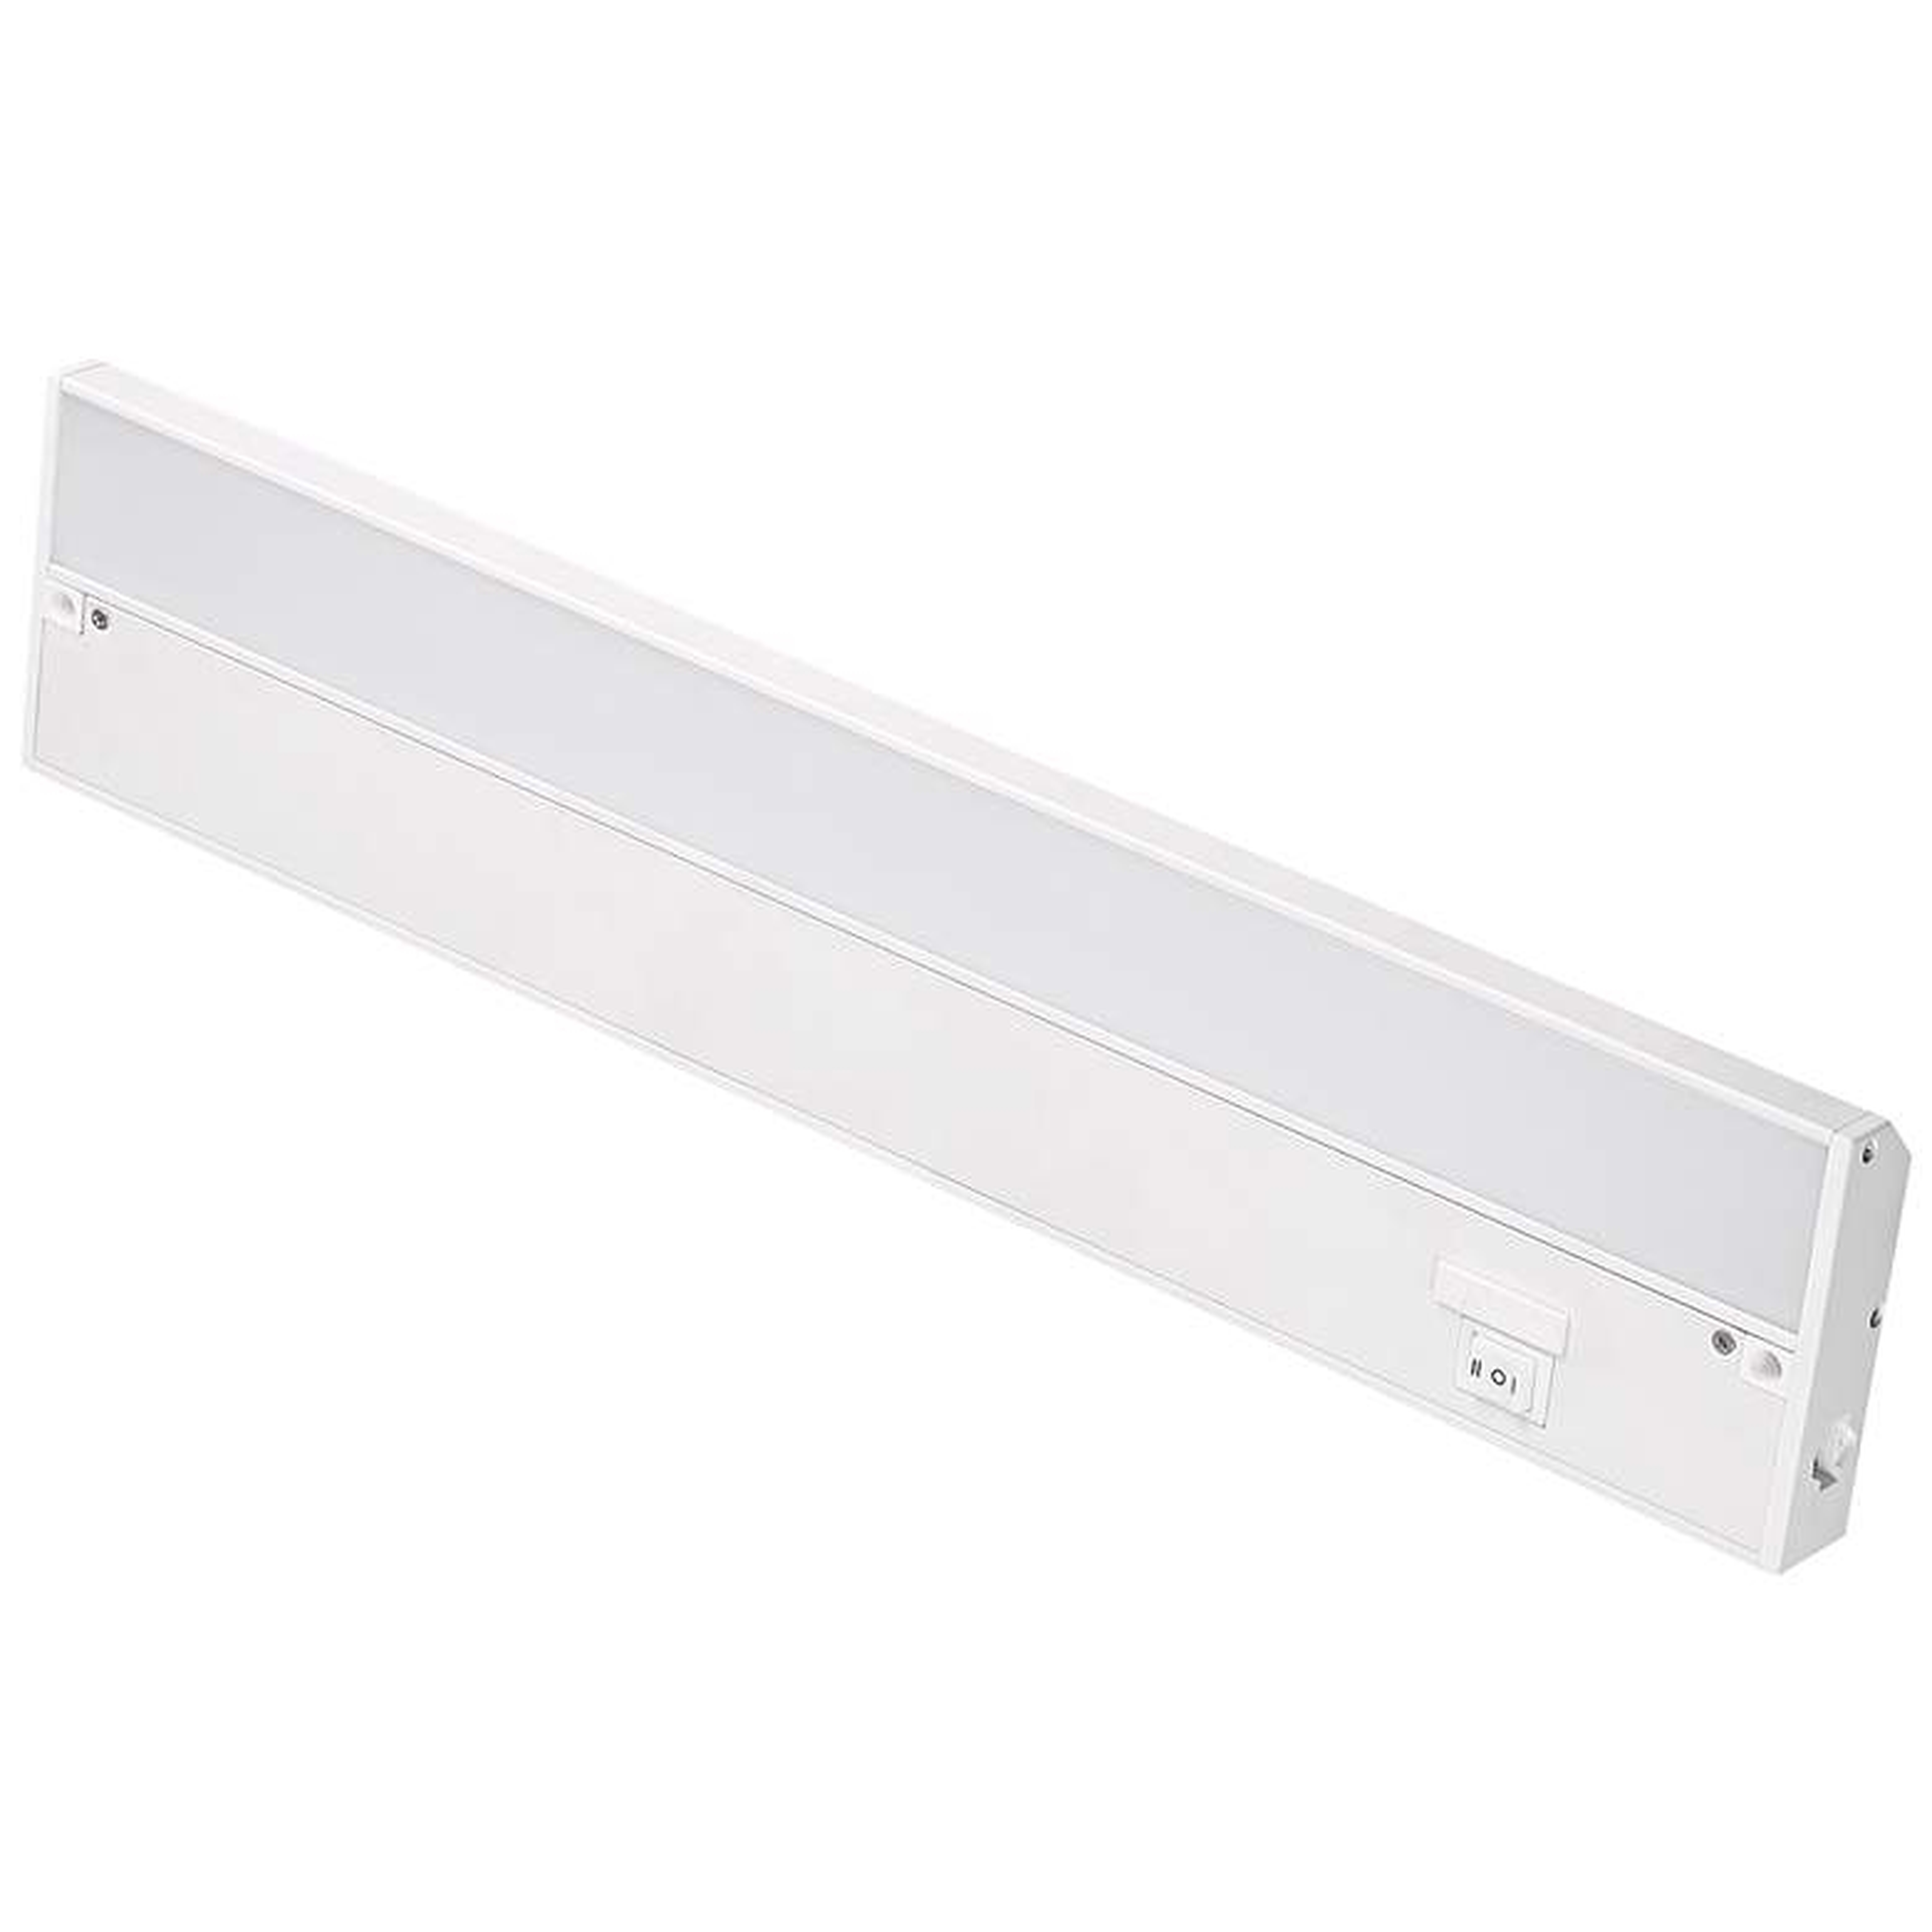 Cyber Tech 18" Wide White LED Under Cabinet Light - Lamps Plus